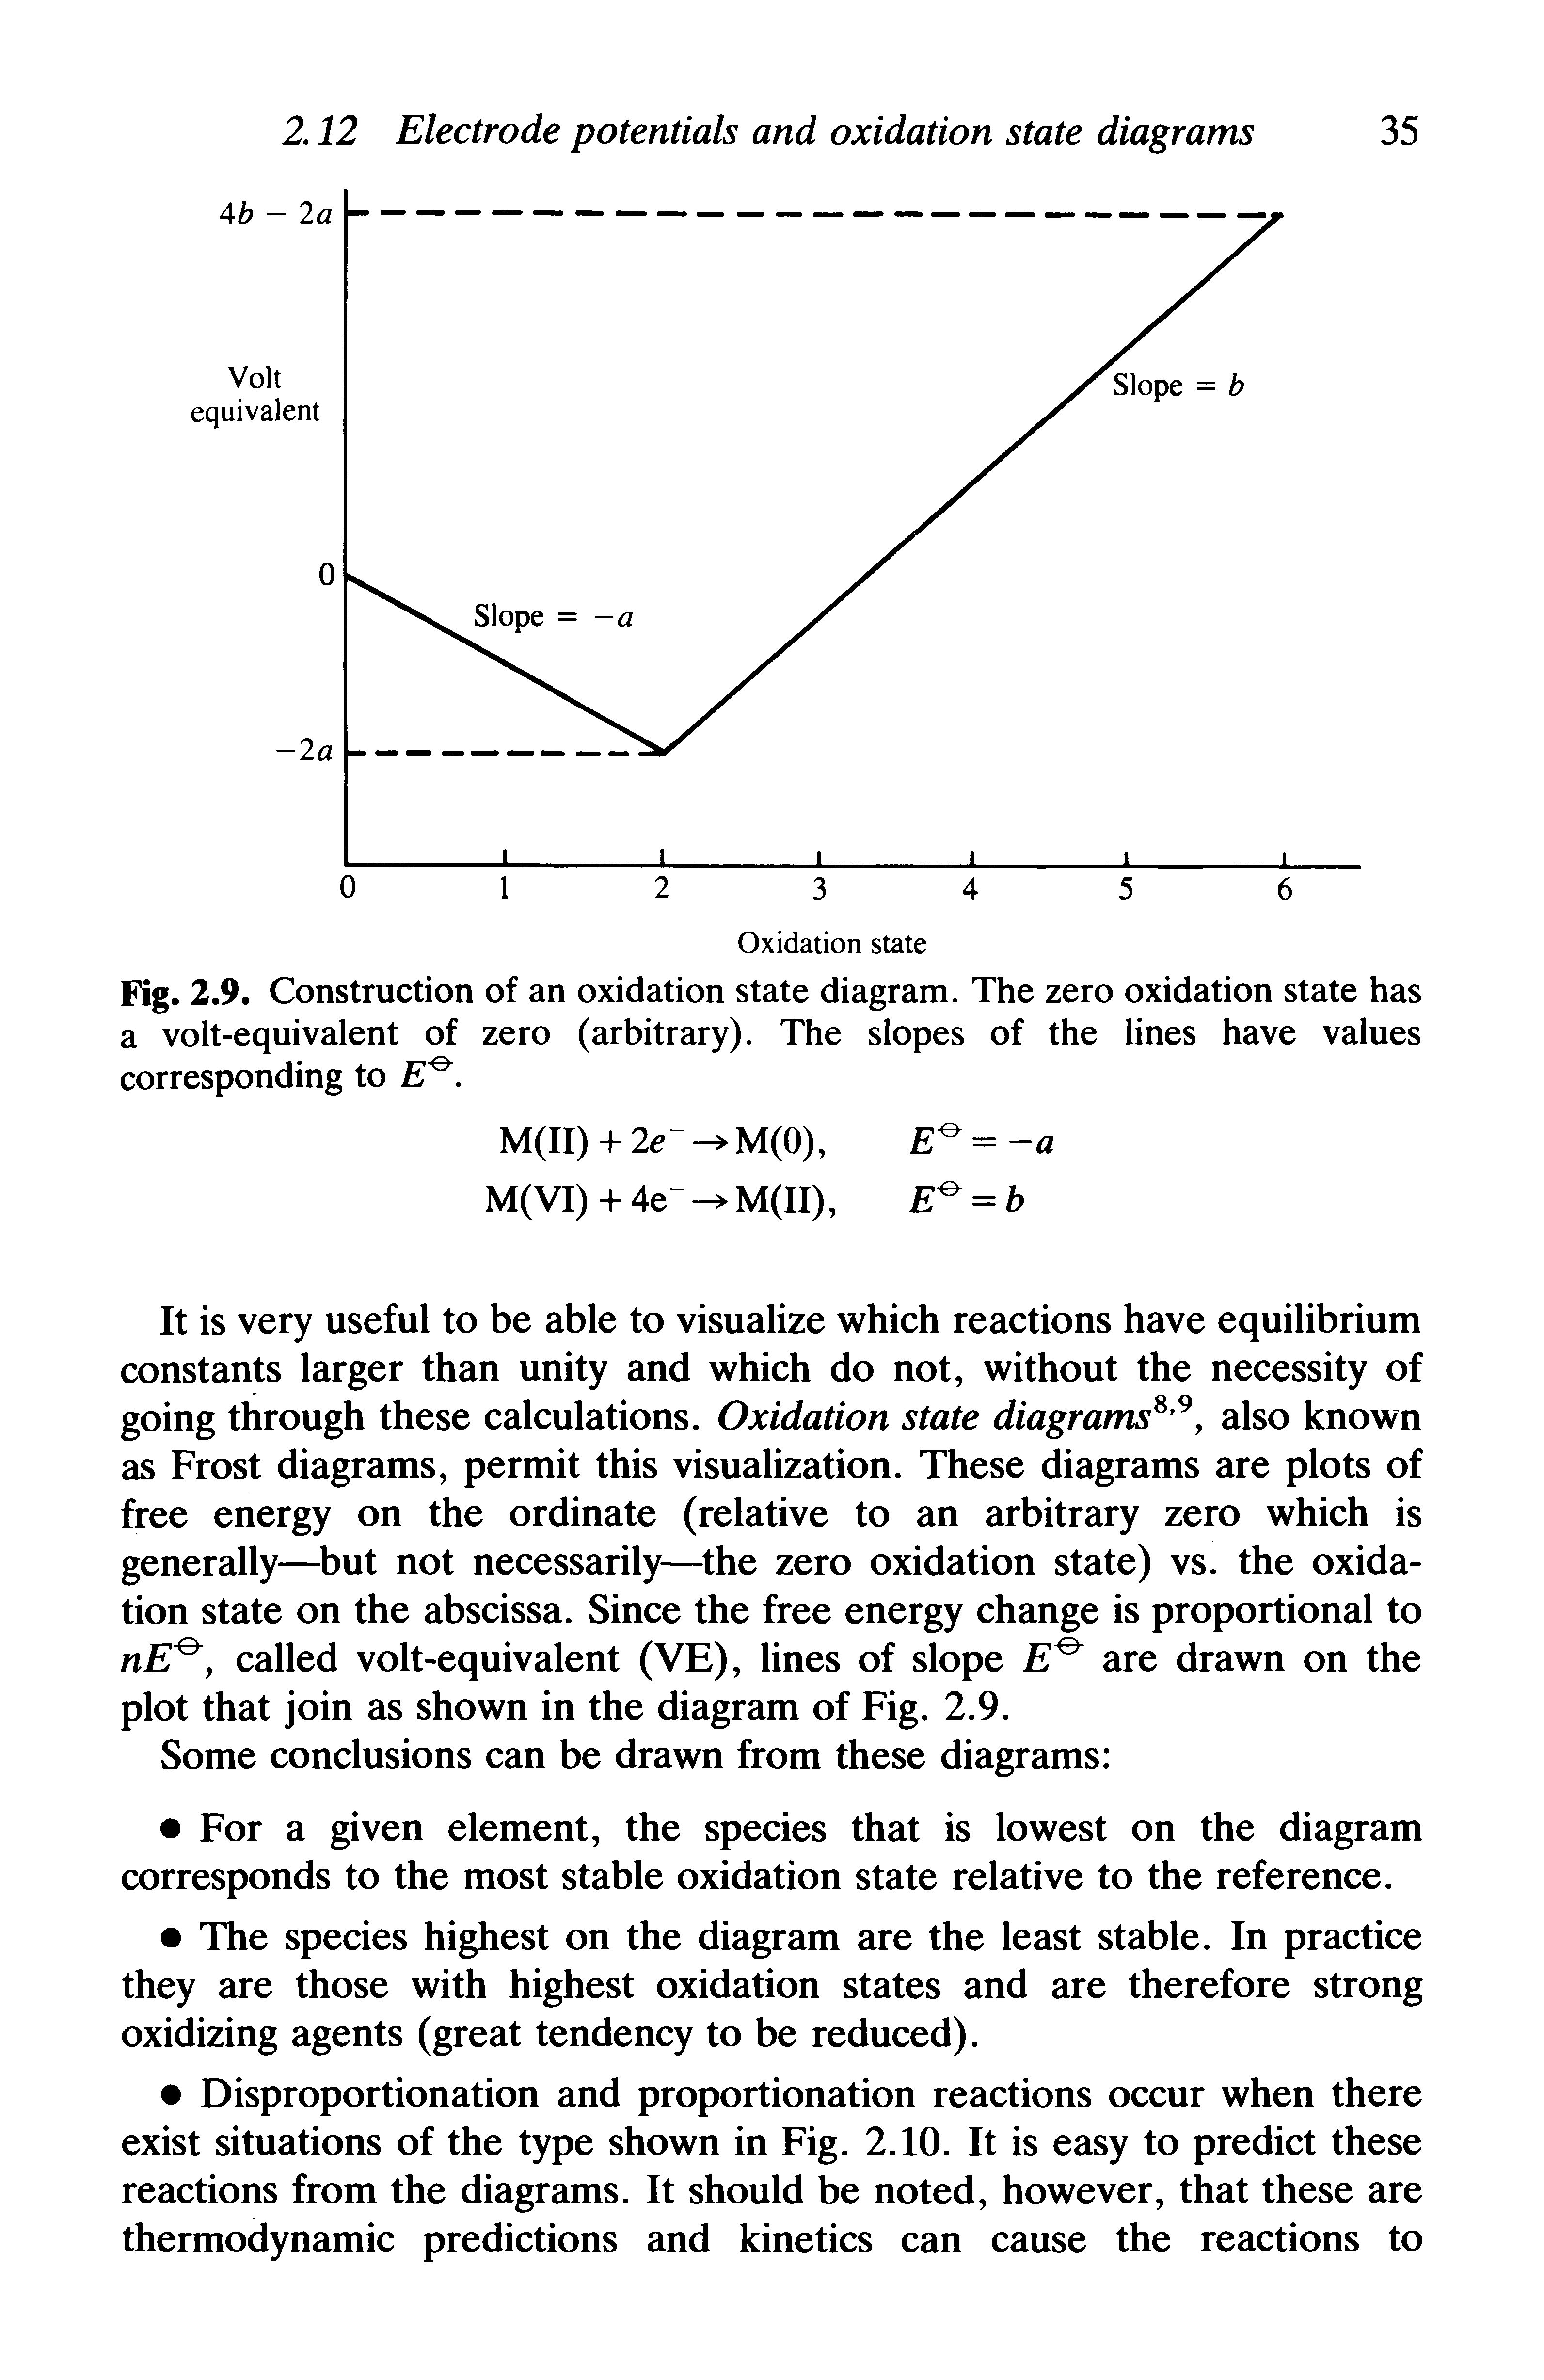 Fig. 2.9. Construction of an oxidation state diagram. The zero oxidation state has a volt-equivalent of zero (arbitrary). The slopes of the lines have values corresponding to...